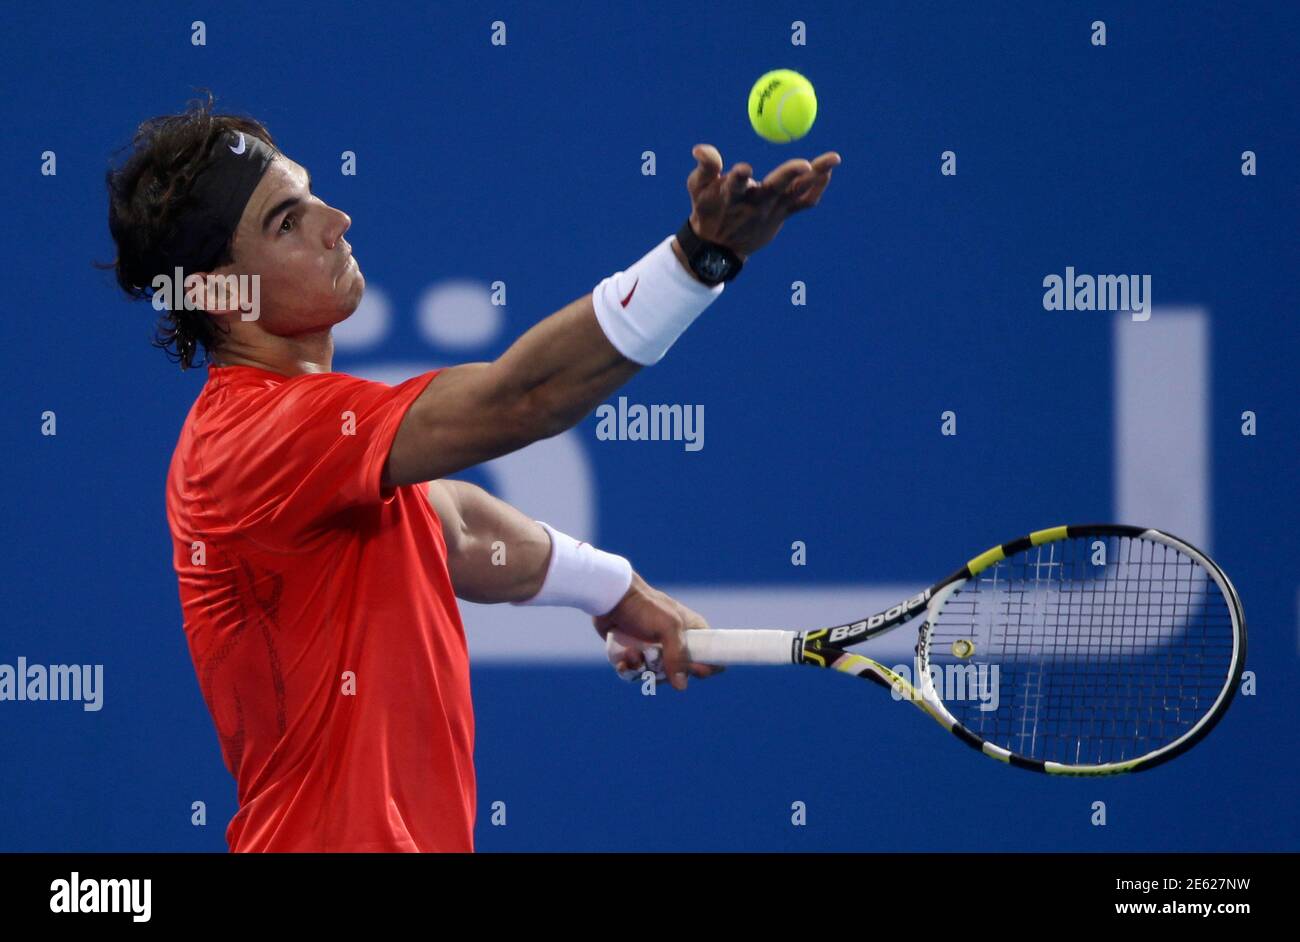 Rafael Nadal of Spain serves the ball to Roger Federer of Switzerland  during the finals of the Mubadala World Tennis Championship at the International  Tennis Complex in Zayed Sports City, Abu Dhabi